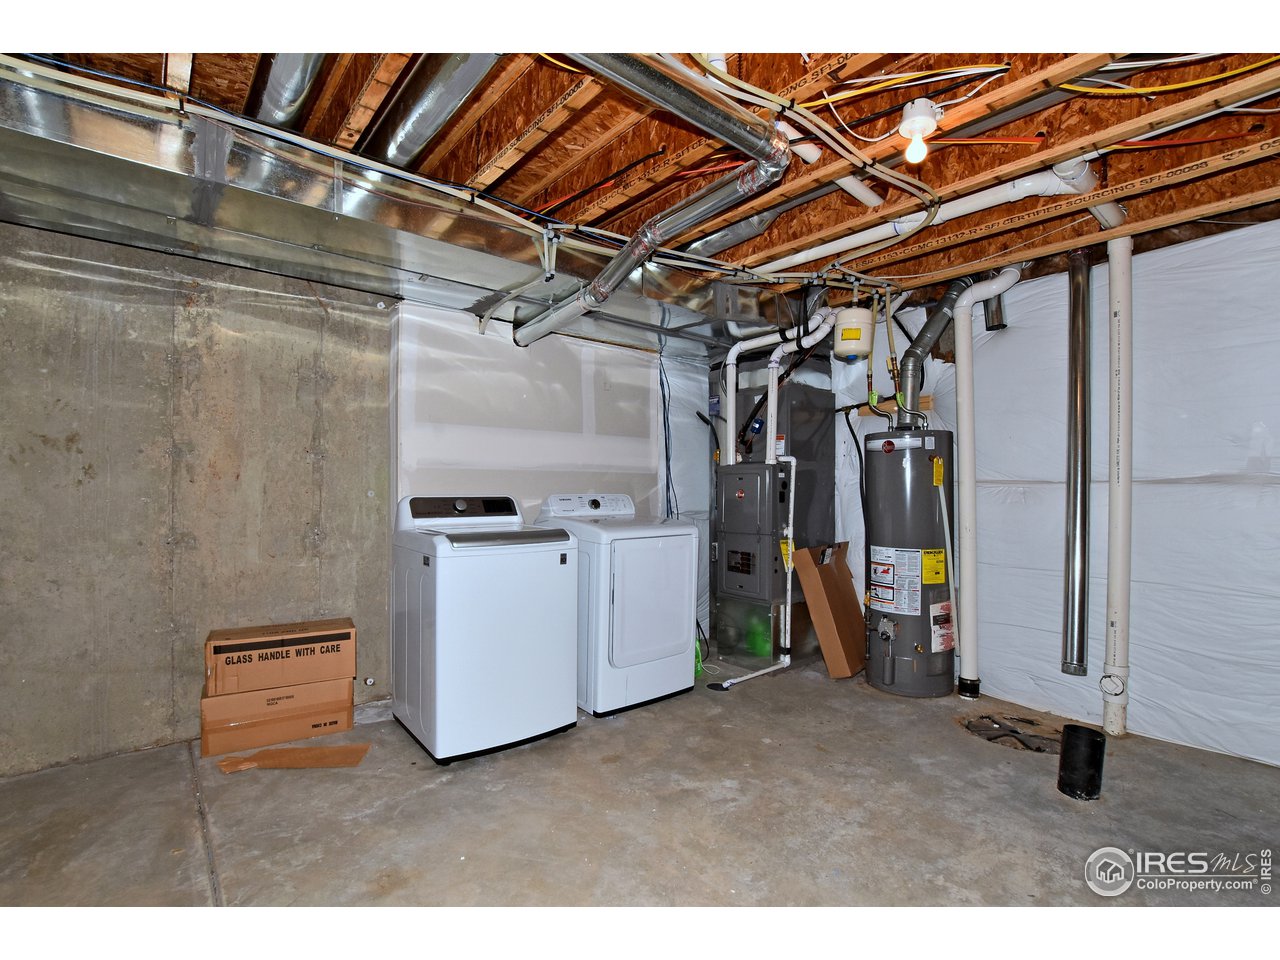 Basement Laundry Area   (Washer/Dryer negotiable)  High Efficiency Furnace, AC, 40 gallon water heater